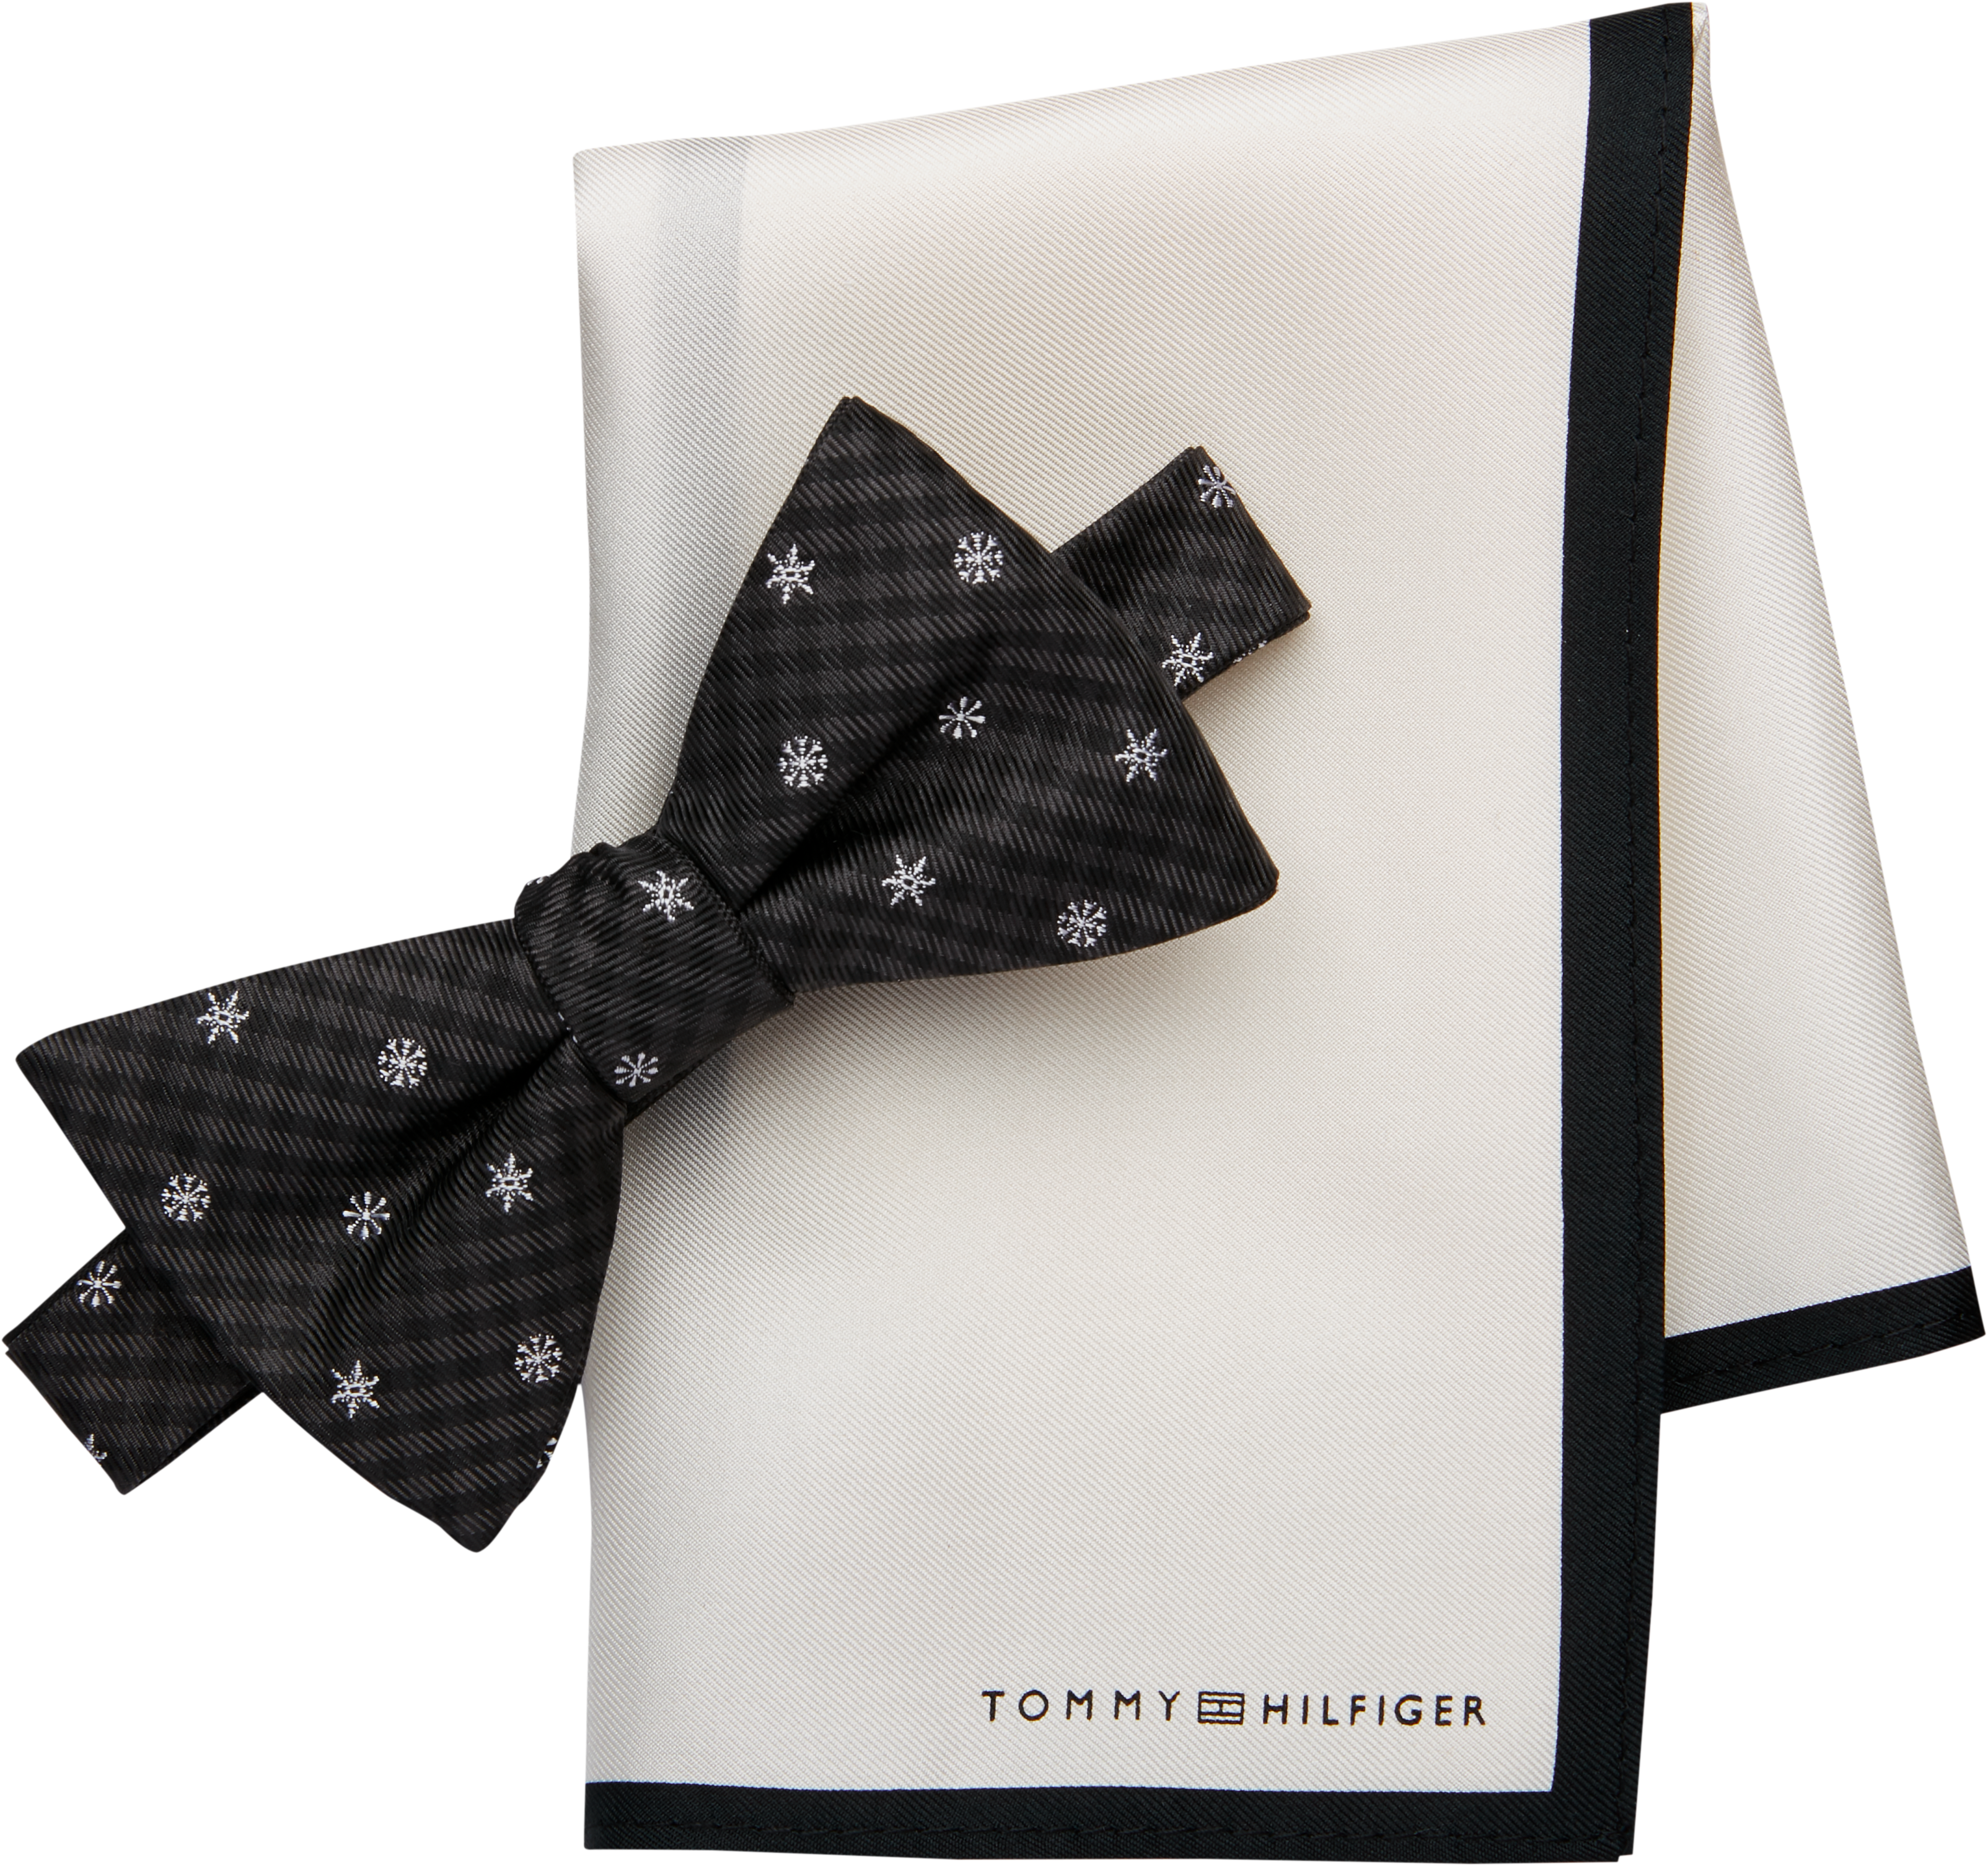 tommy hilfiger bow